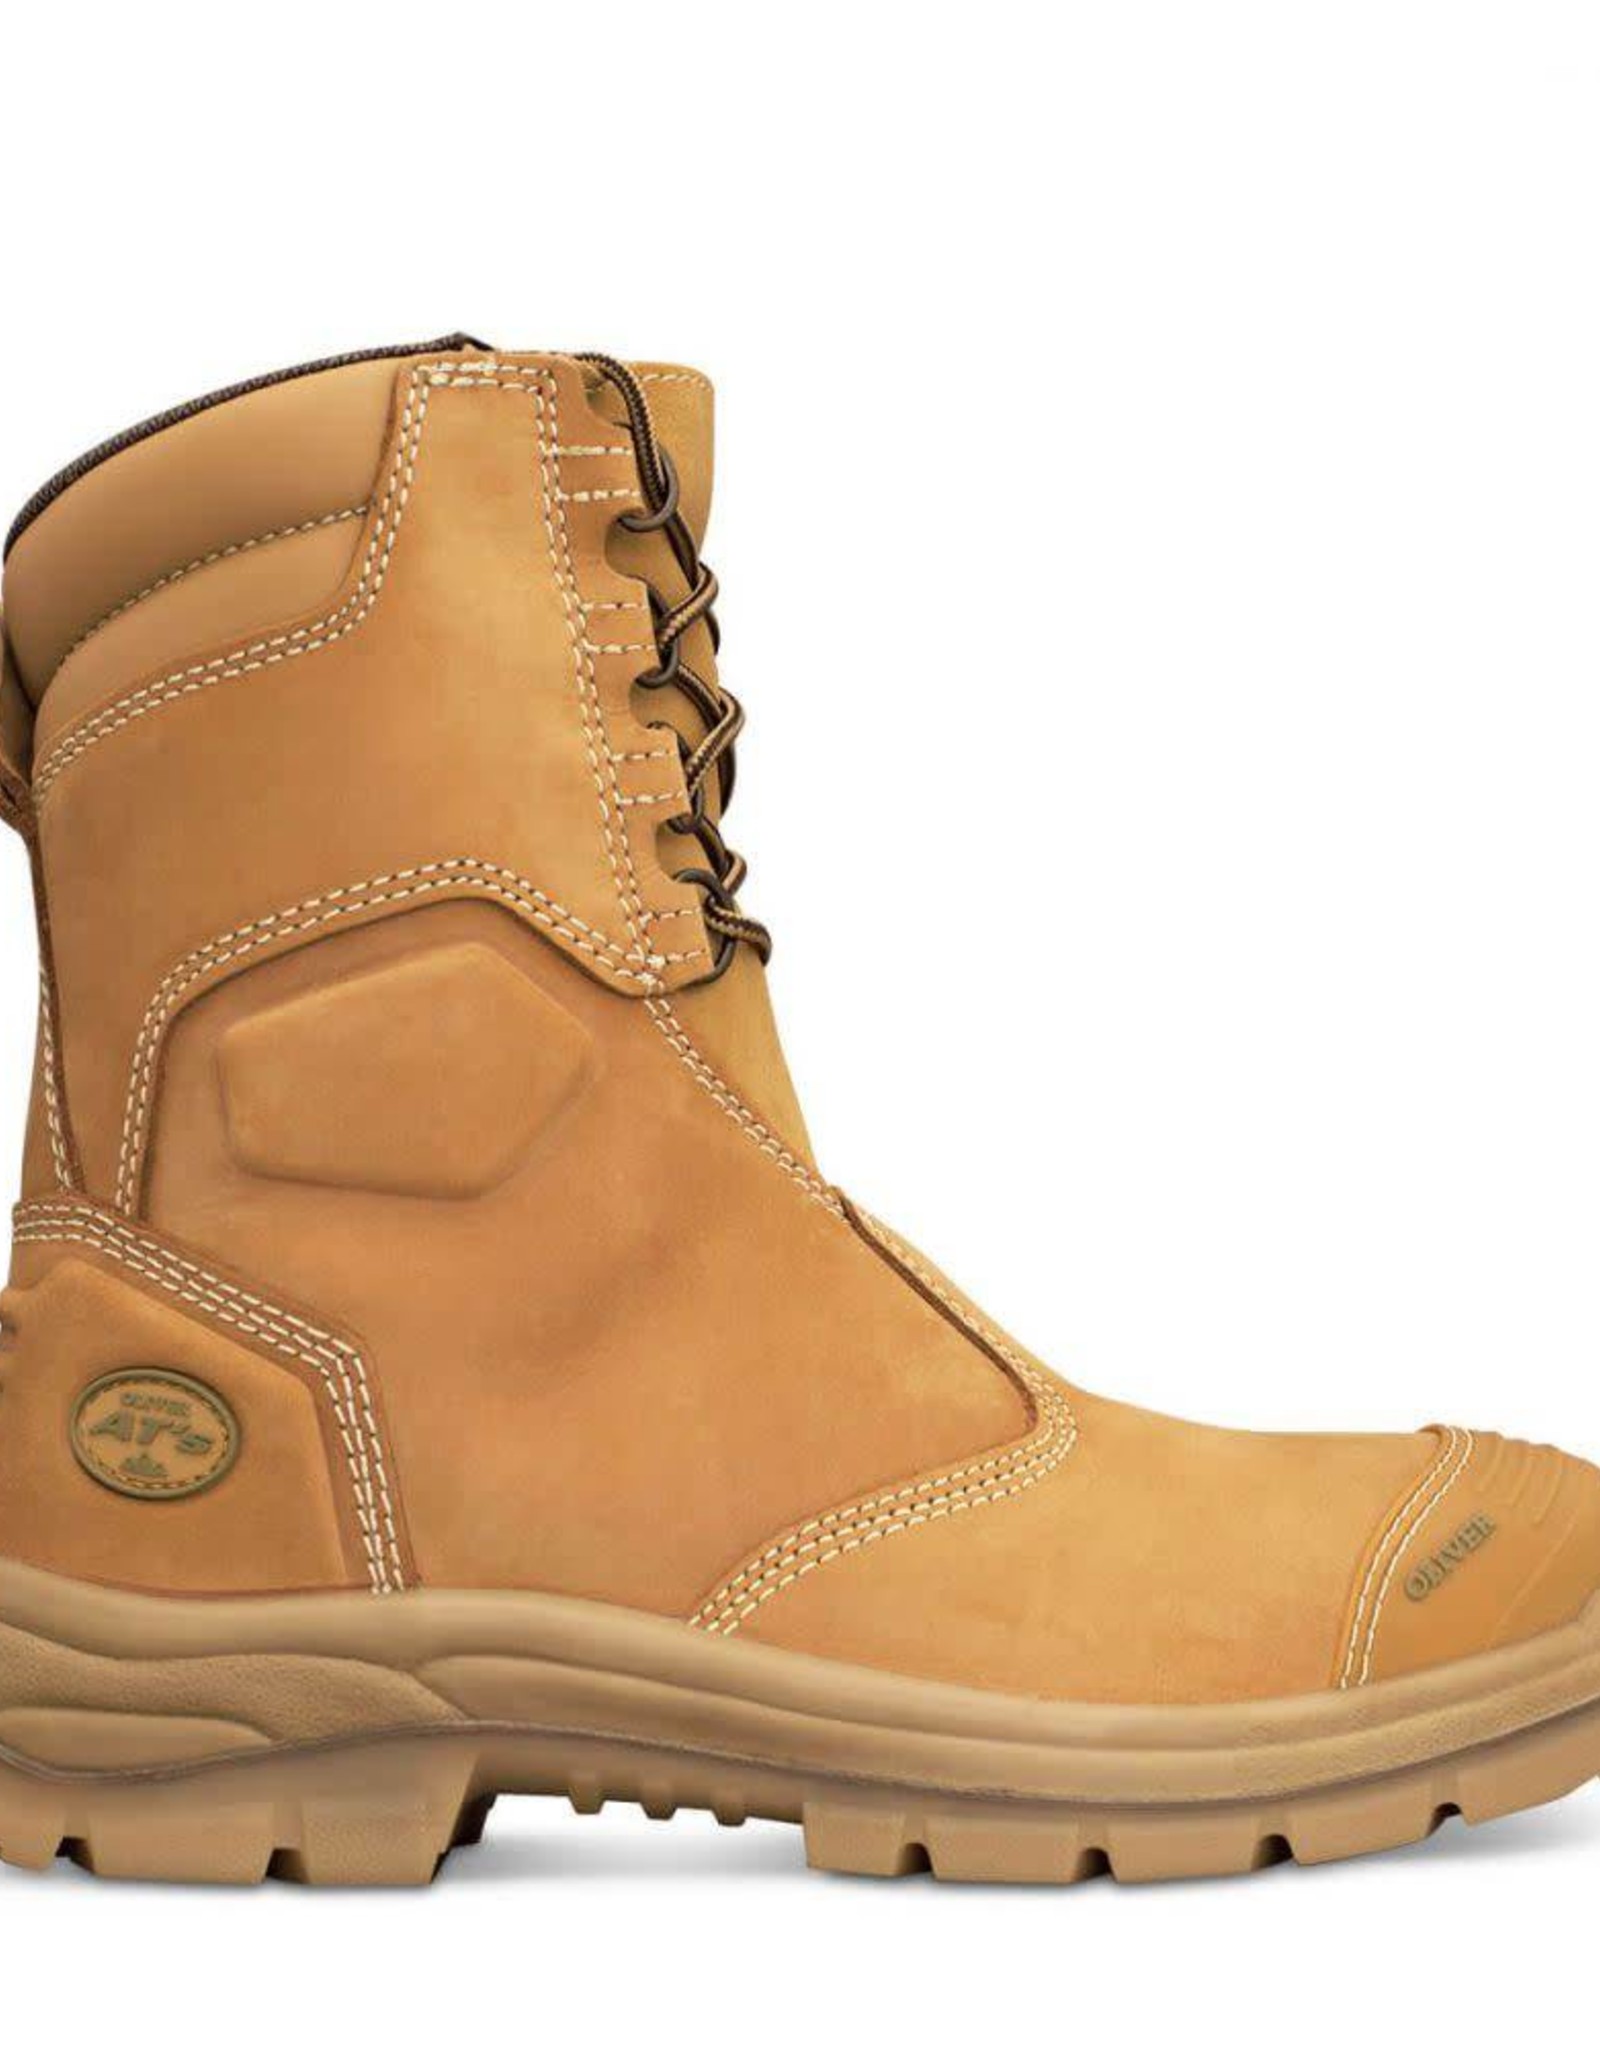 Oliver Oliver 55-385 200mm Hi-Leg Wheat Zip Sided Safety Boots